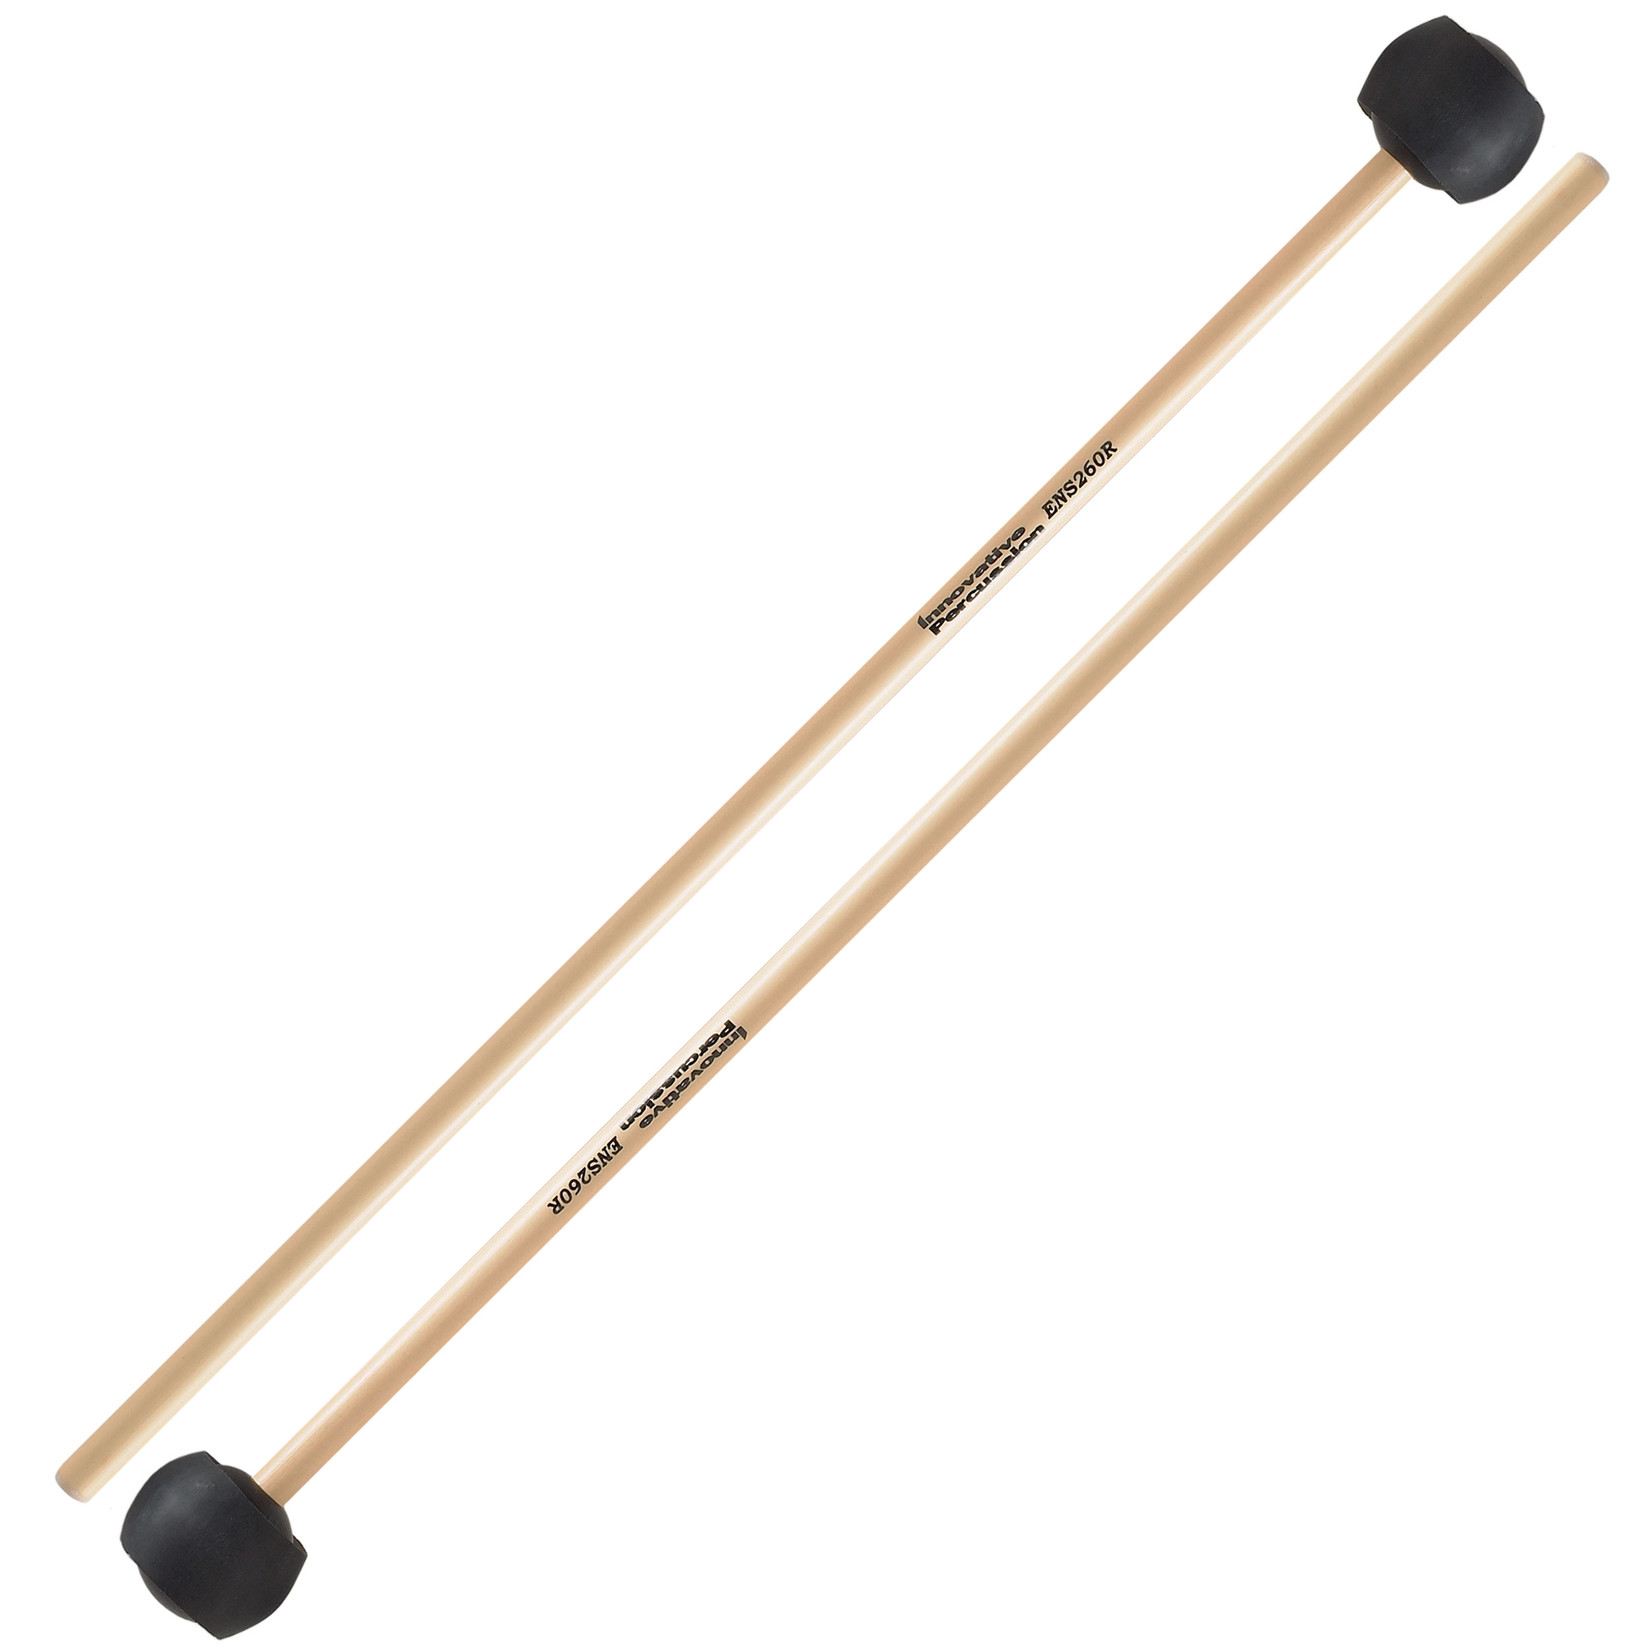 Innovative Percussion ENS260 Ensemble Series LATEX COVERED MALLETS - BIRCH